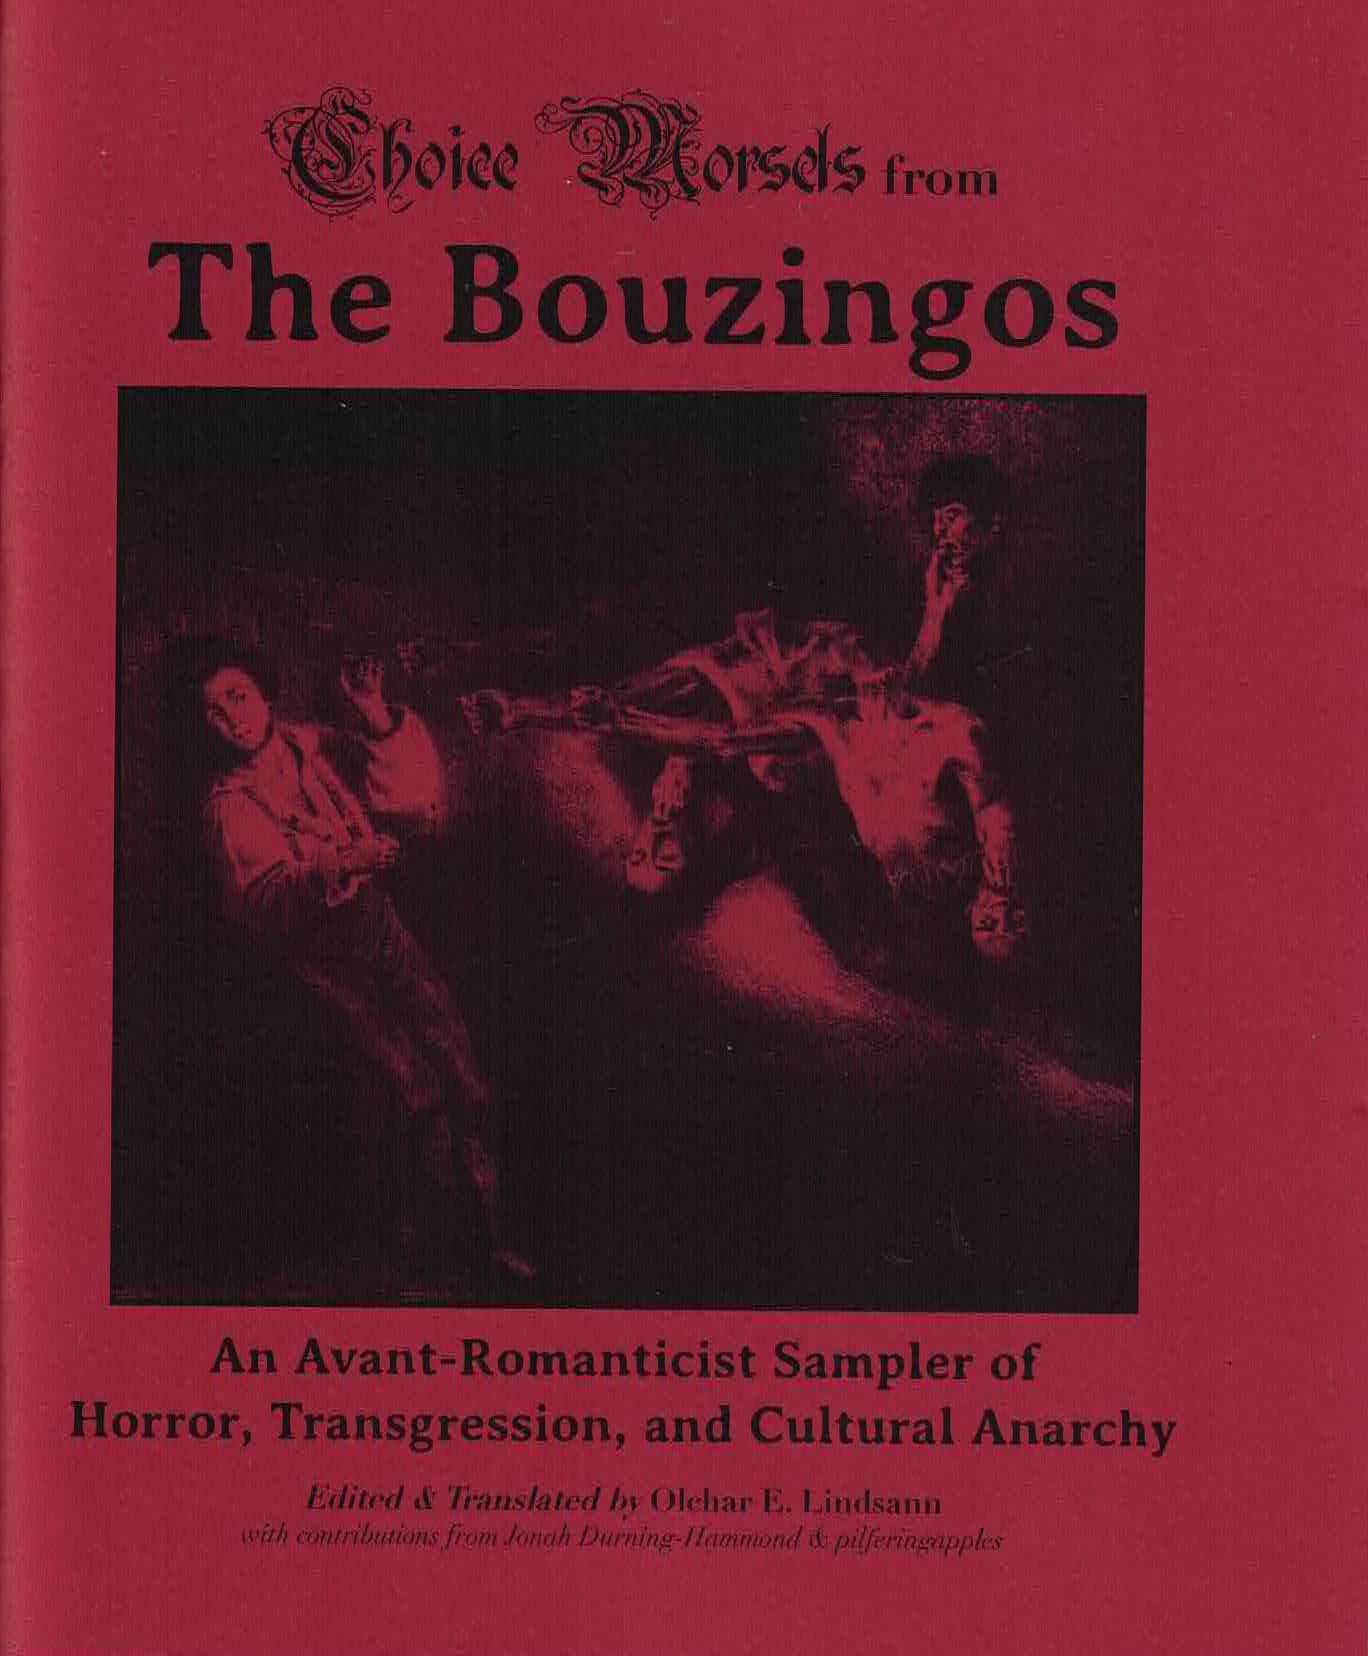 Choice Morsels from the Bouzingos: An Avant-Romanticist Sampler of Horror, Transgression, & Cultural Anarchy